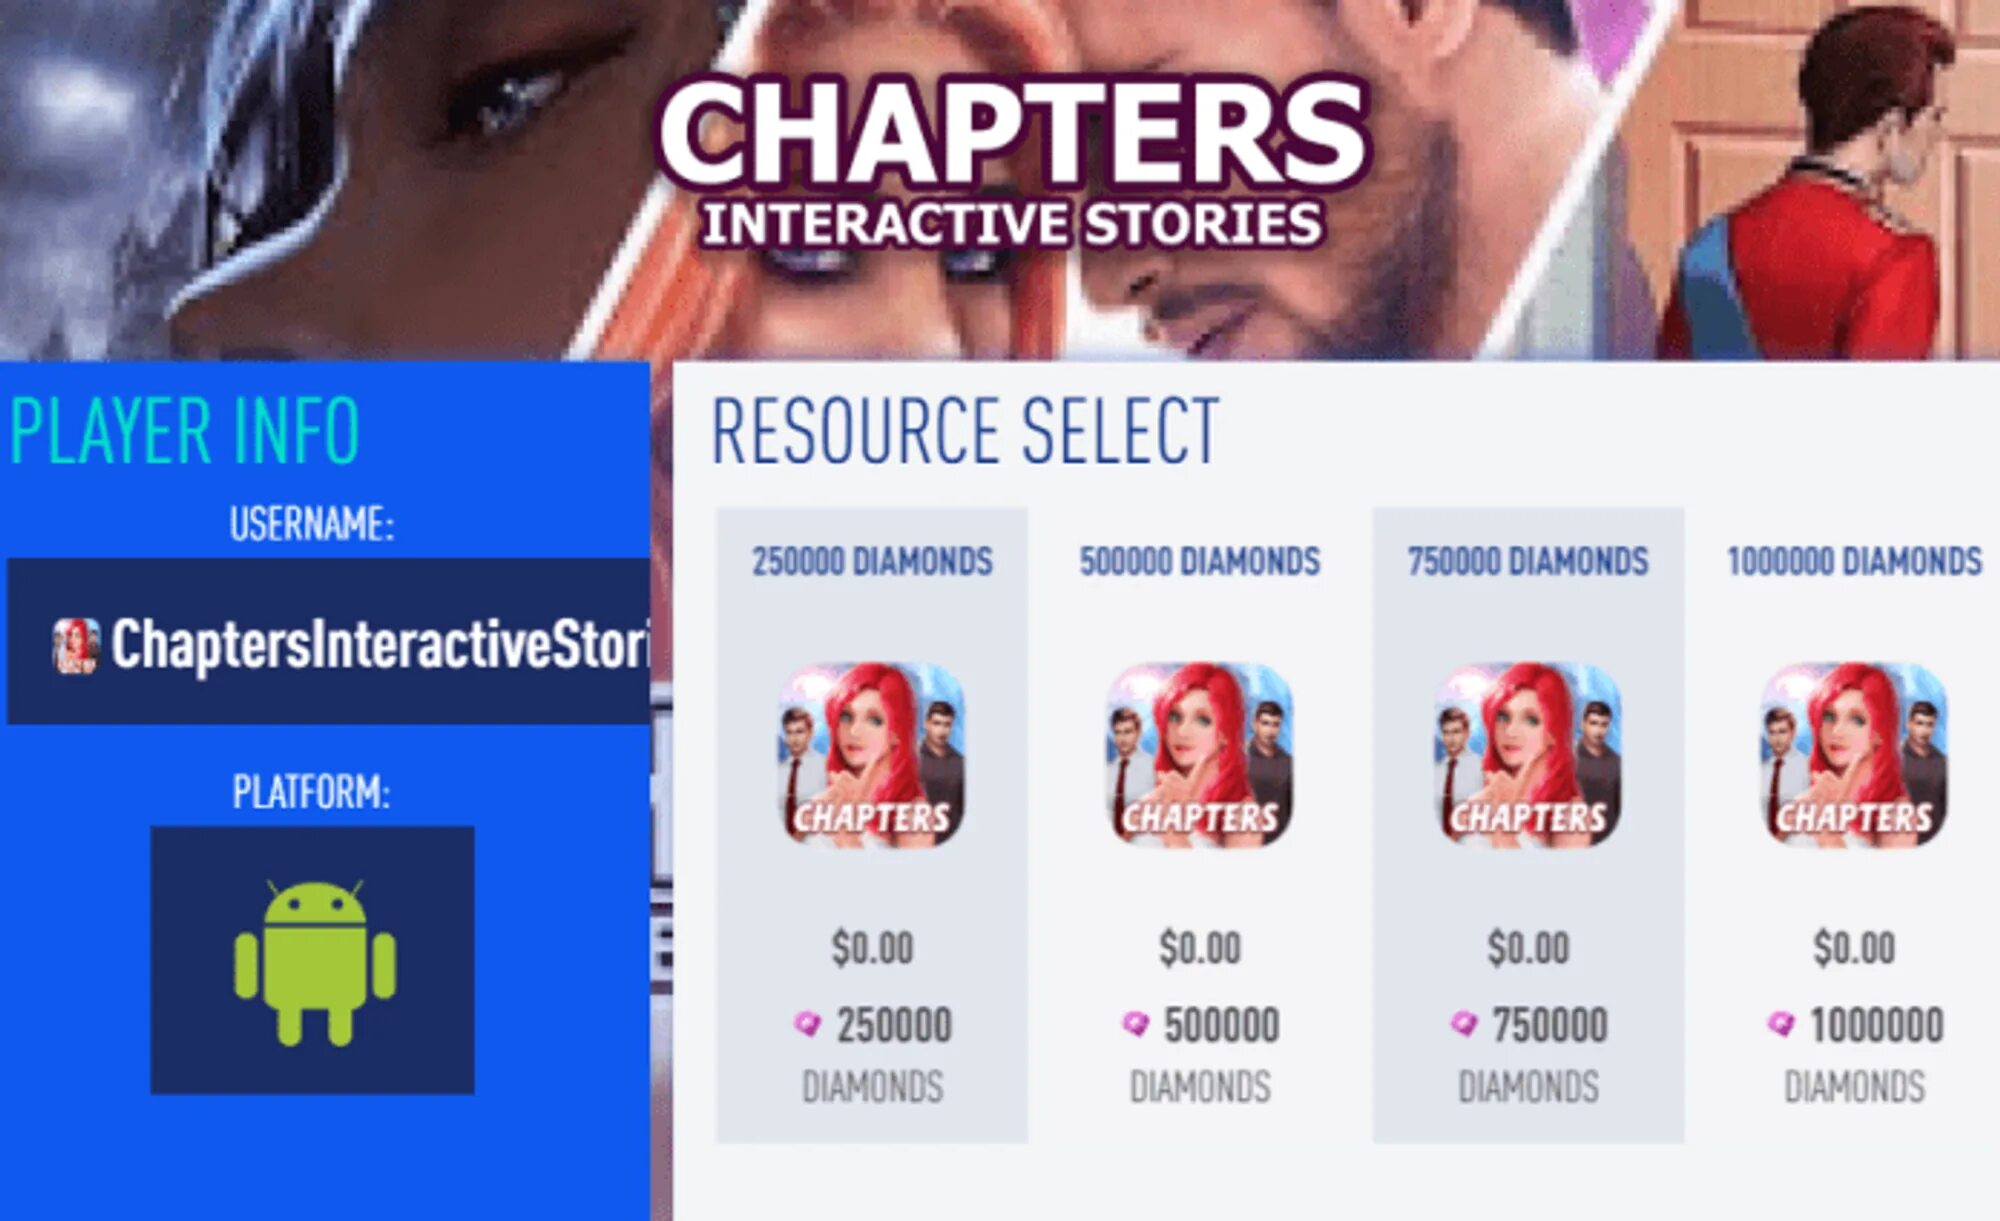 Chapters промокоды. Chapters: interactive stories. Промокод Chapters на Алмазы. Коды для игры Chapters.